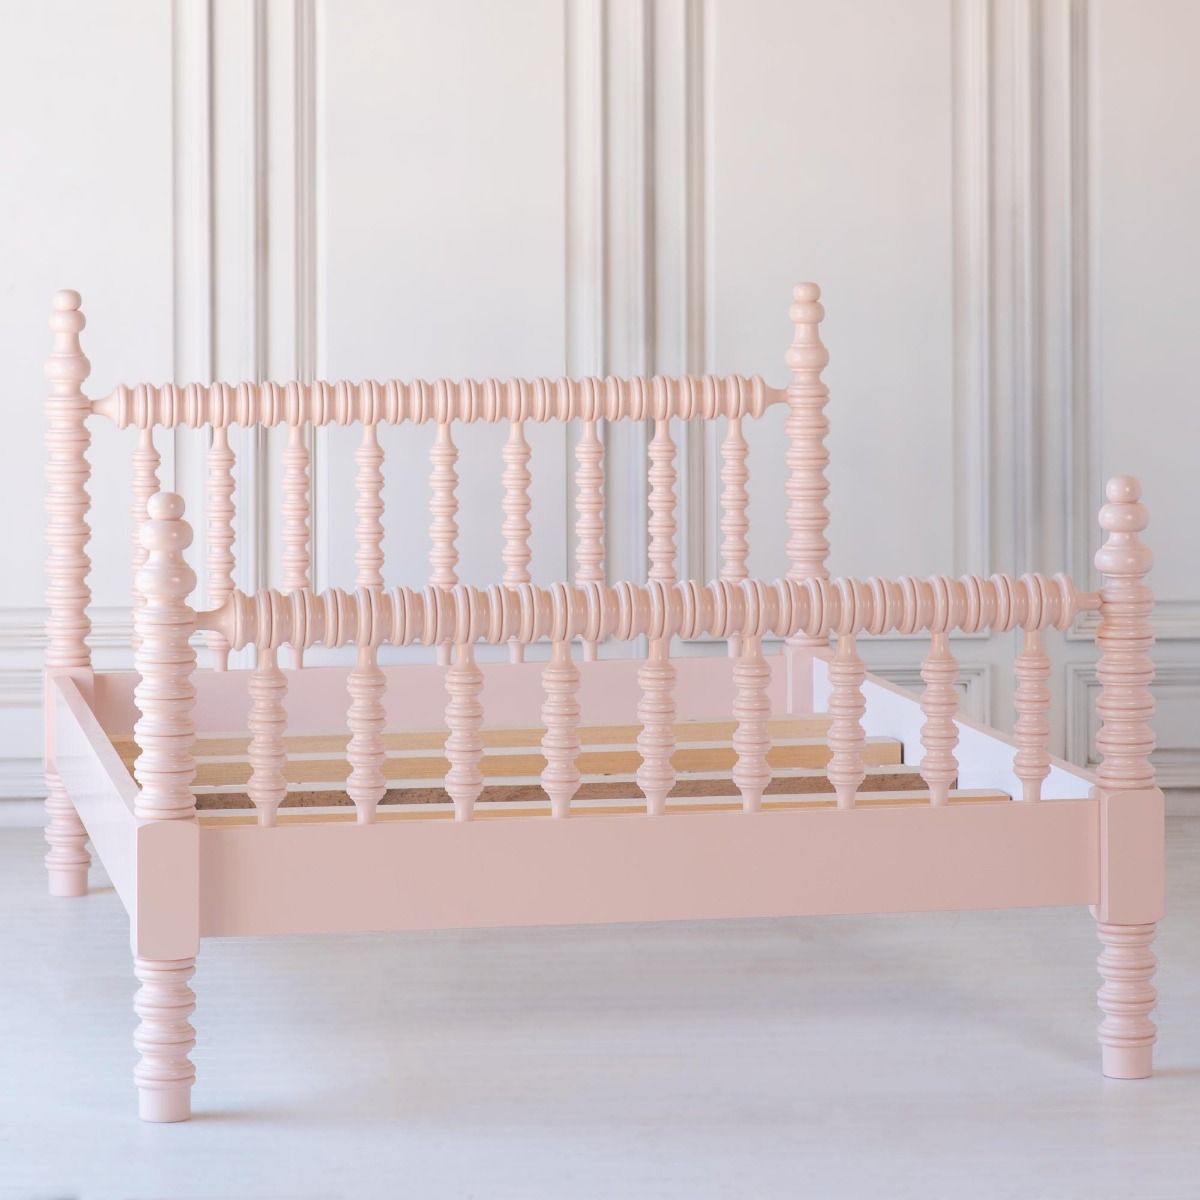 Customizable spool bed - Jenny Lind Spindle Bed Custom Size and Color